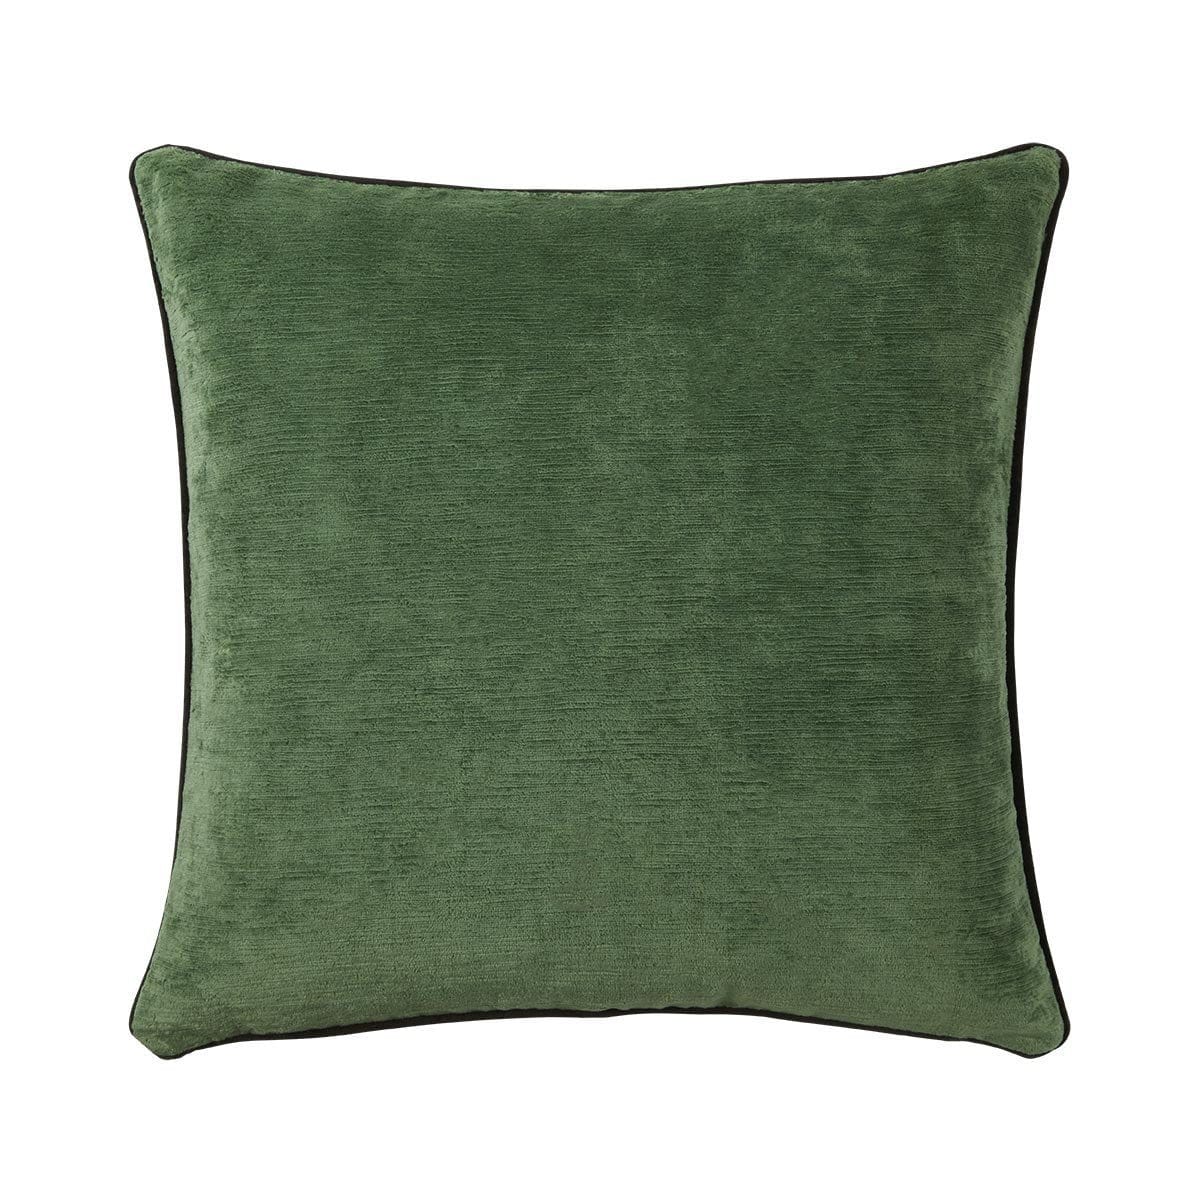 Decorative Pillows Iosis Boromée Decorative Pillow by Yves Delorme Menthe / 18 x 18 in Yves Delorme